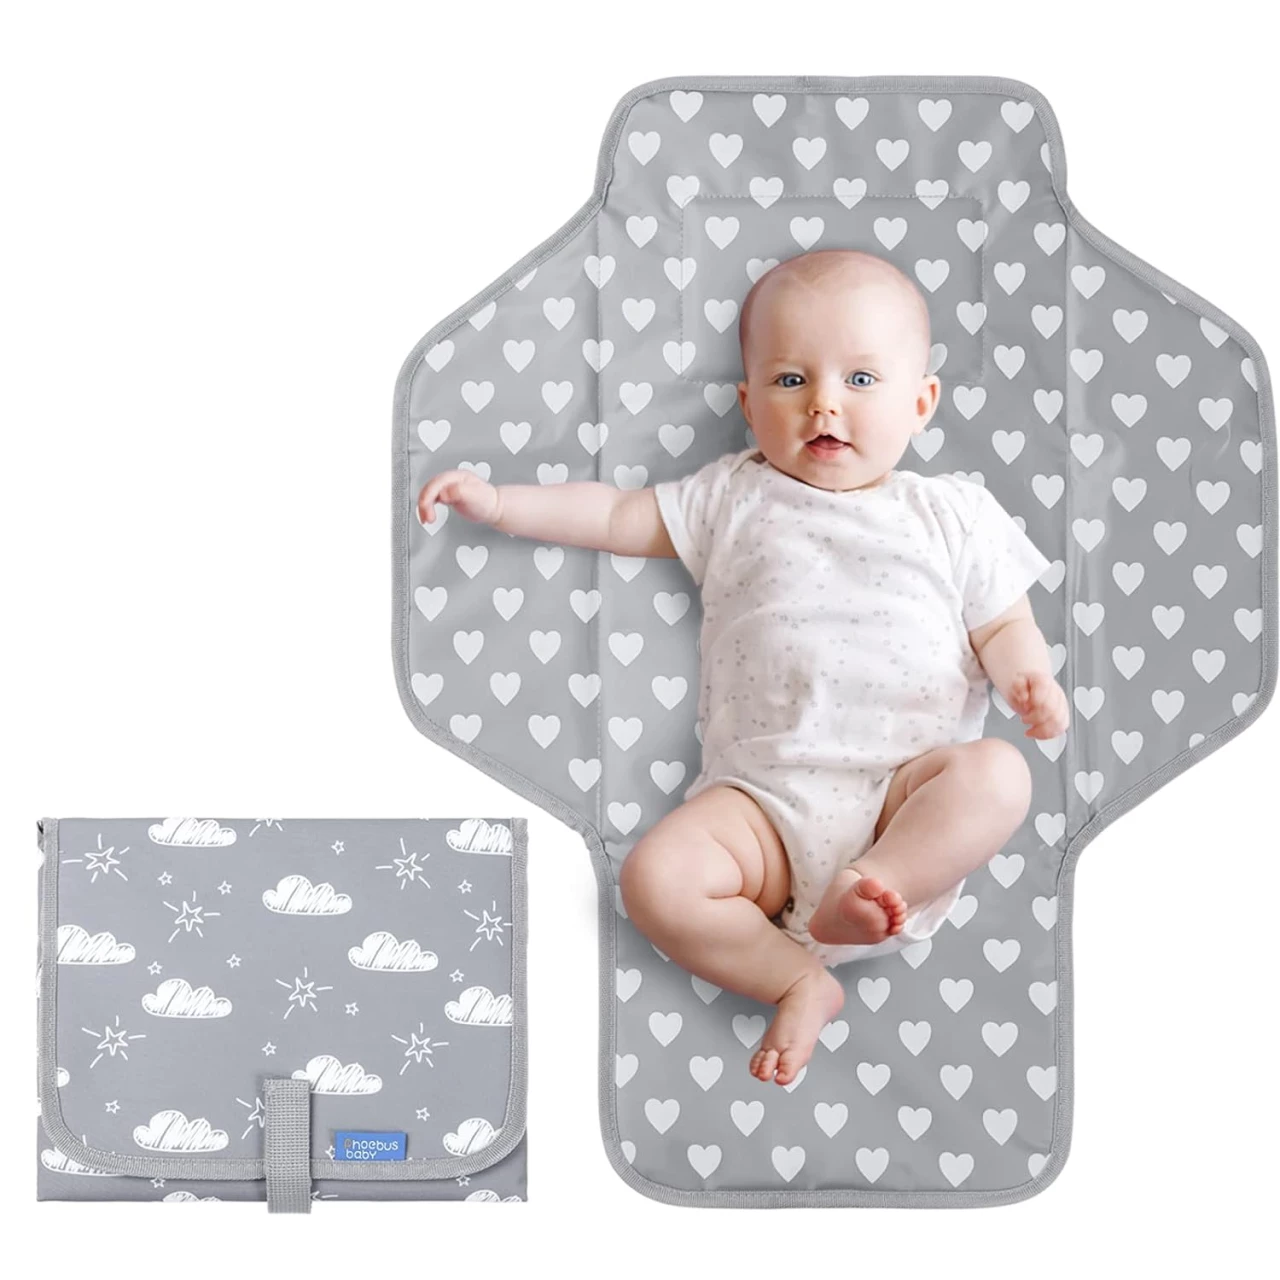 Baby Portable Changing Pad Travel - Waterproof Compact Diaper Changing Mat with Built-in Pillow - Lightweight &amp; Foldable Changing Station, Newborn Shower Gifts